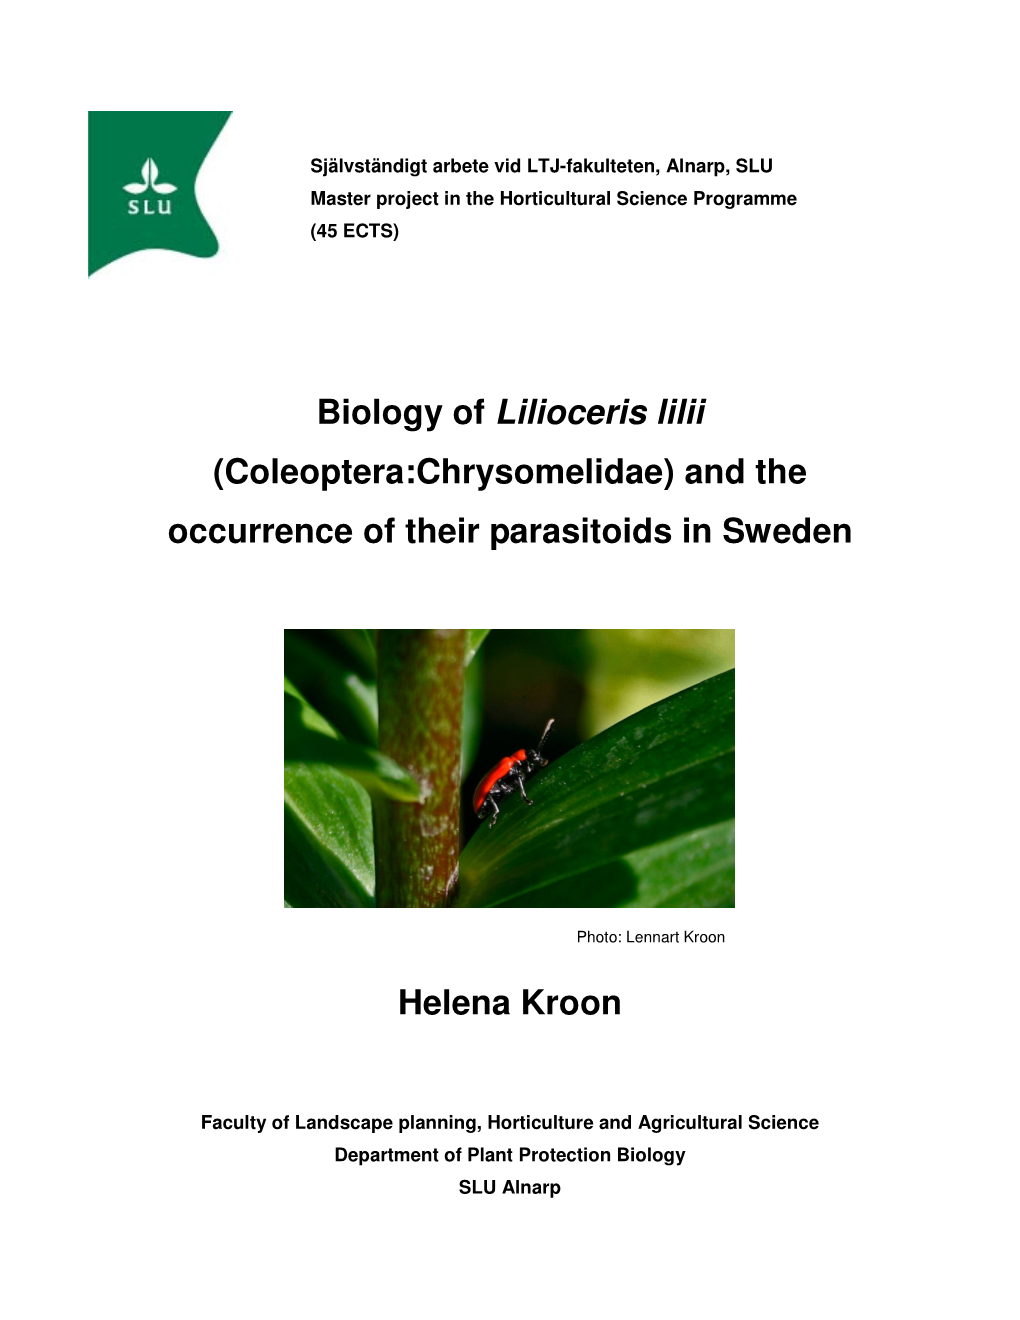 Biology of Lilioceris Lilii (Coleoptera:Chrysomelidae) and the Occurrence of Their Parasitoids in Sweden